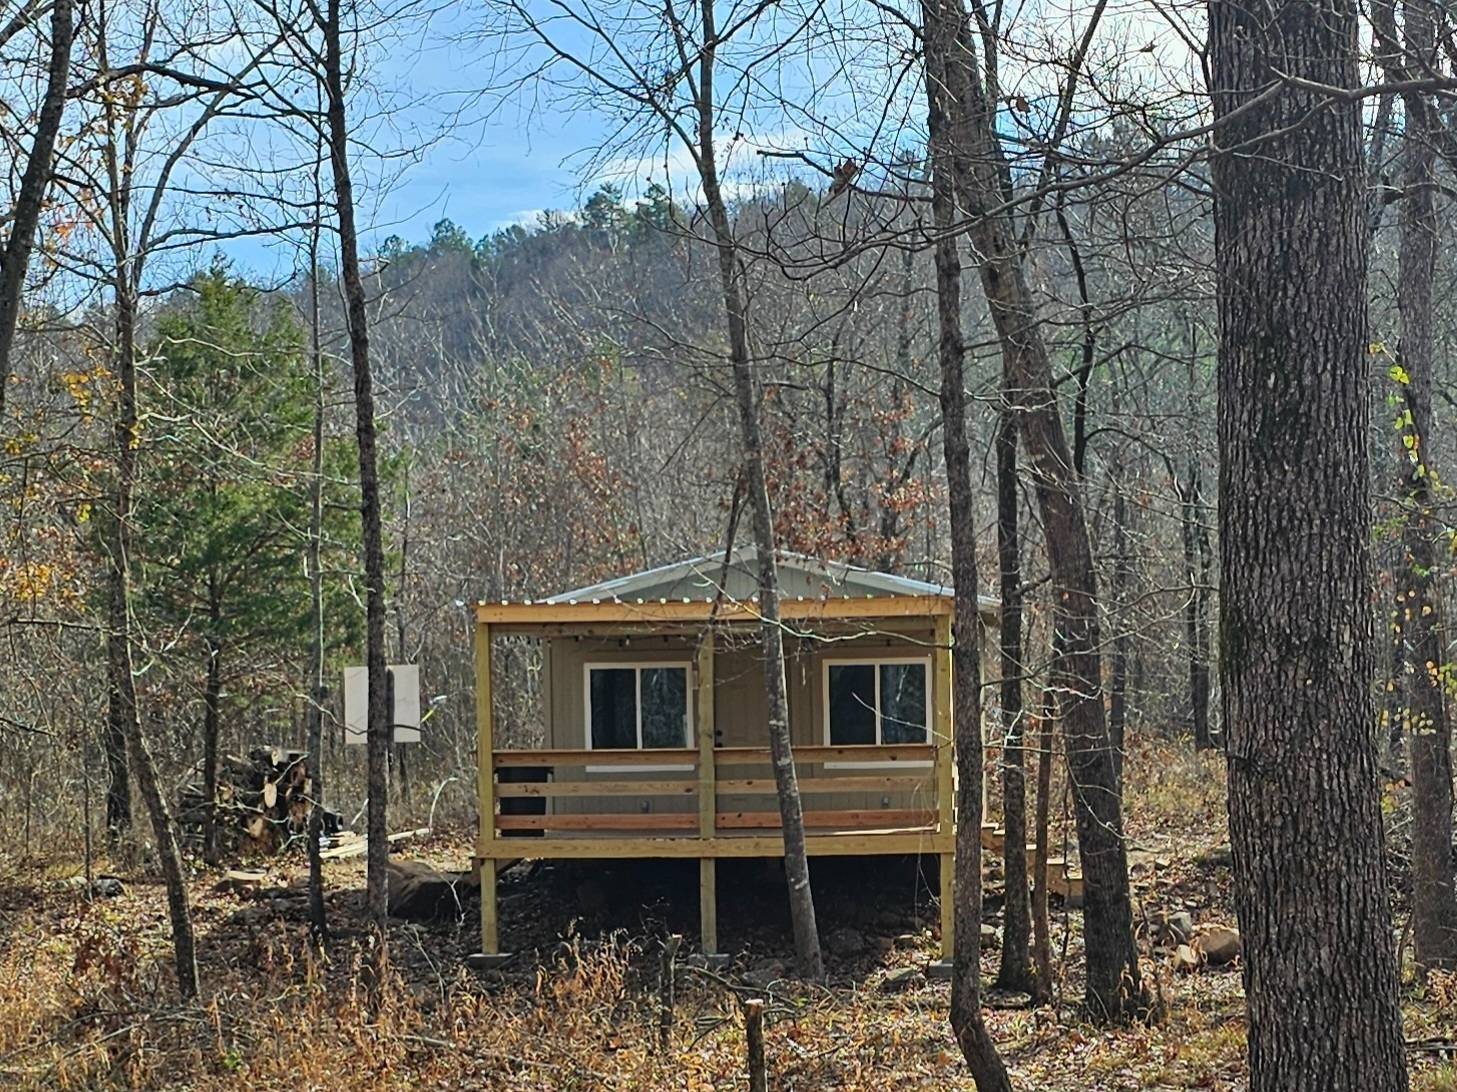 1. Cabin On 10 And The Mountain Fork Creek